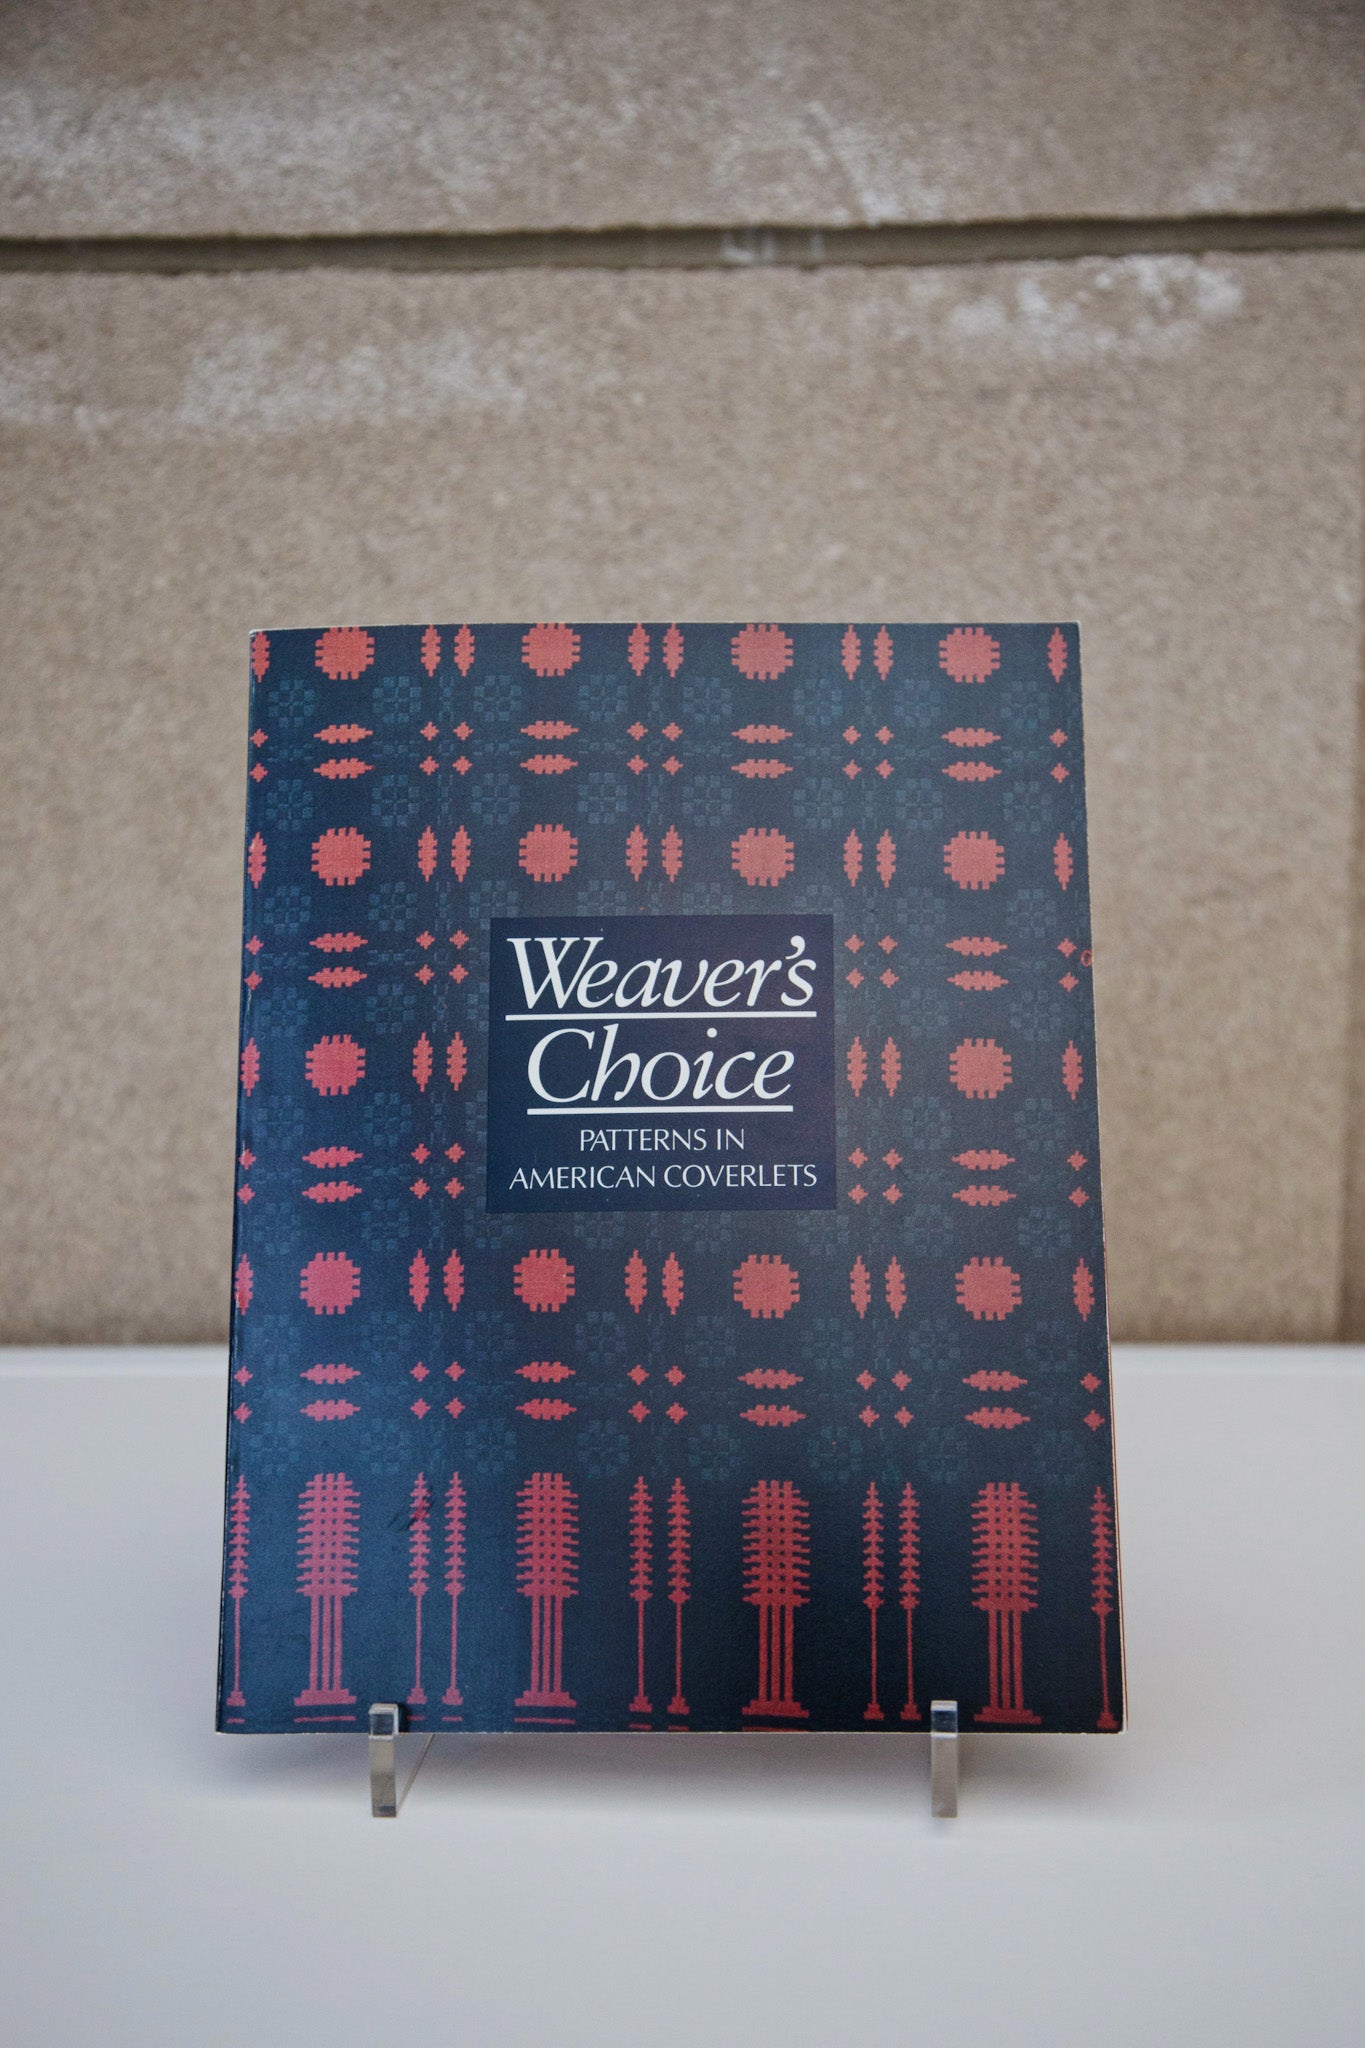 “Weavers Choice: Patterns in American Coverlets” book on a book stand.